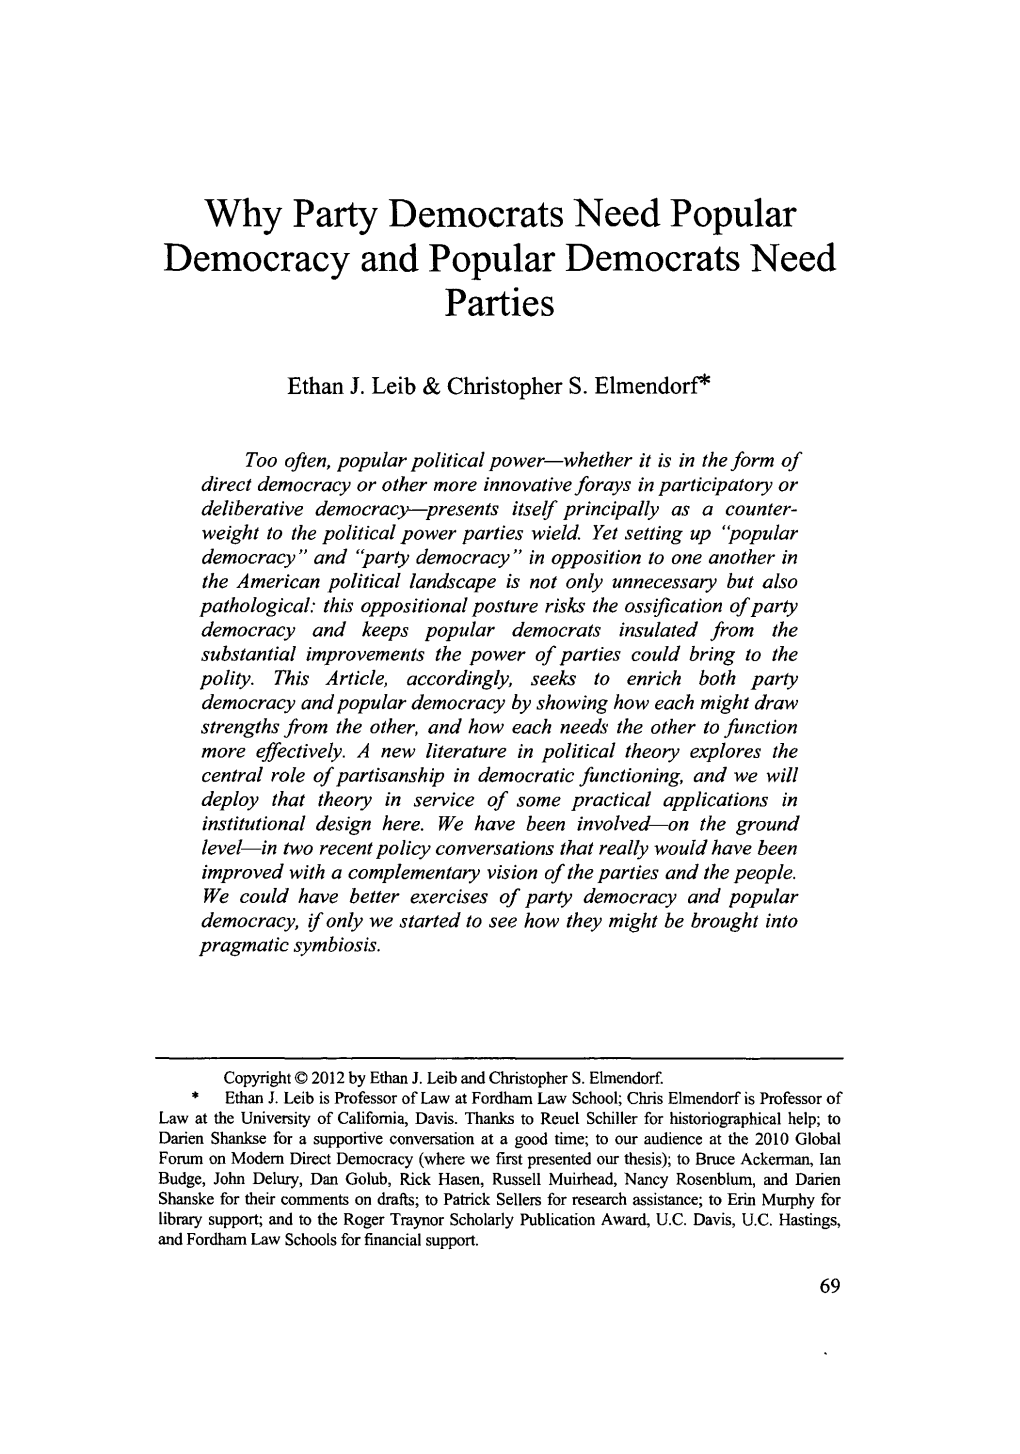 Why Party Democrats Need Popular Democracy and Popular Democrats Need Parties